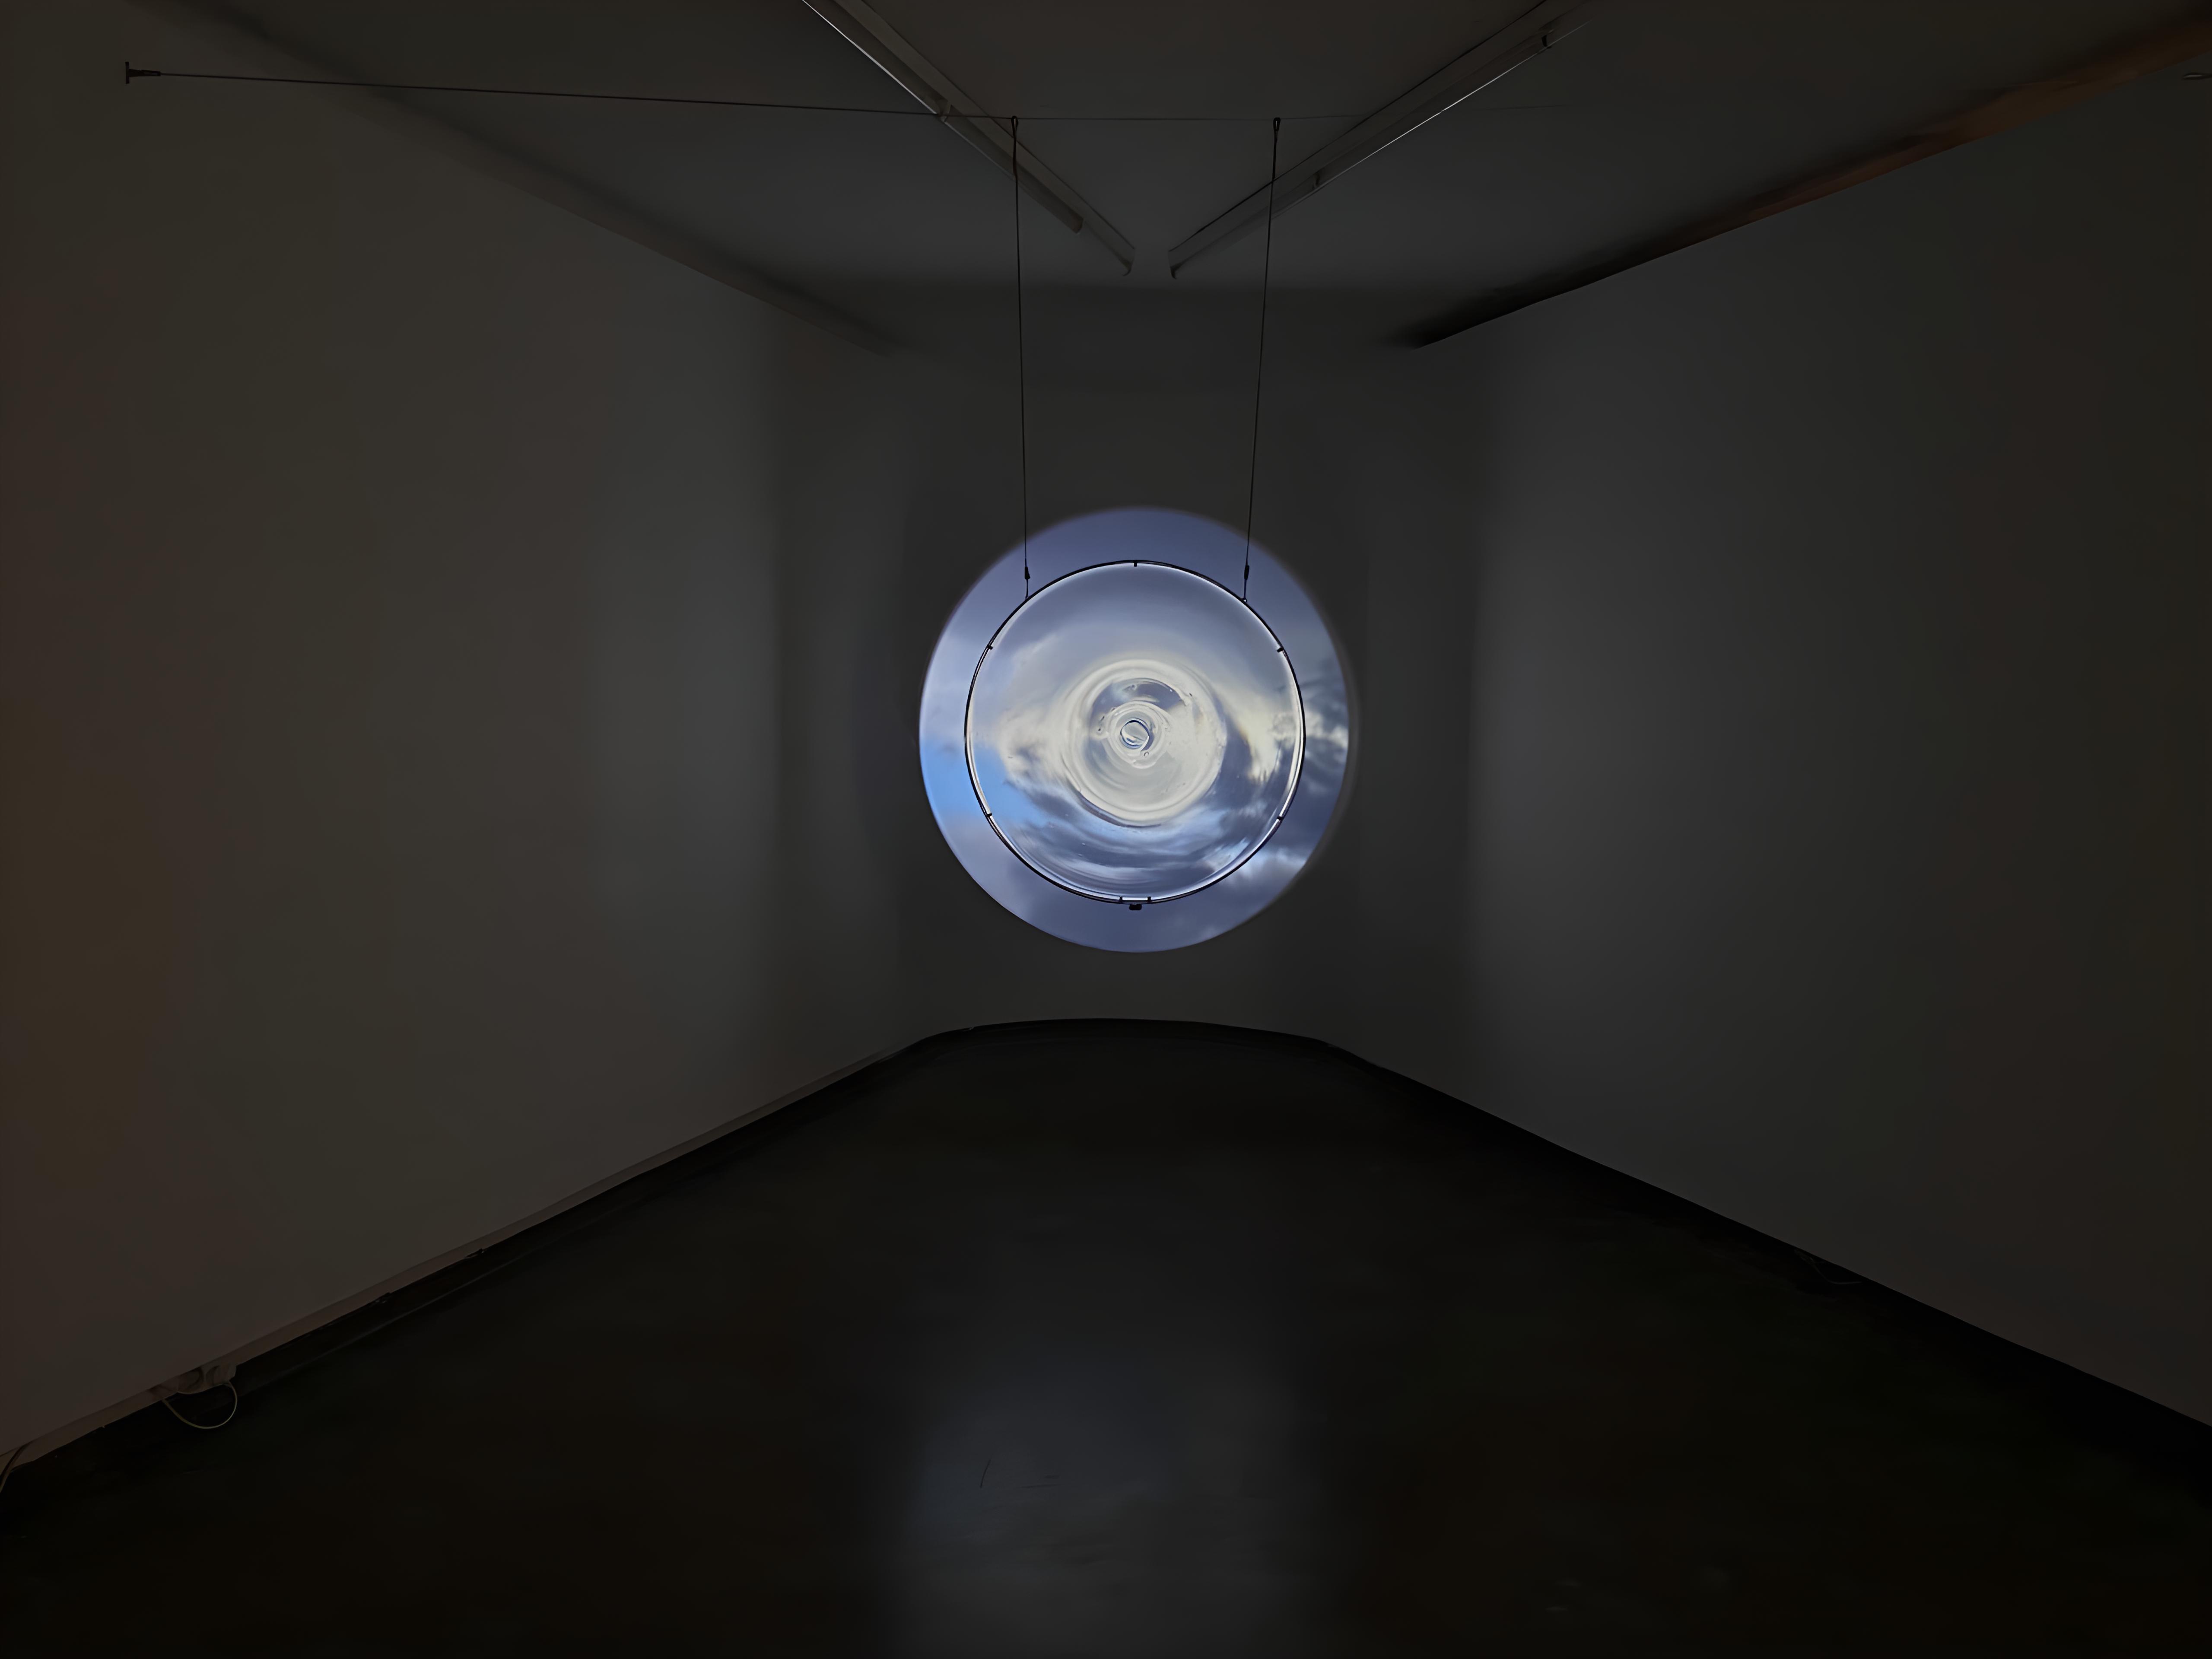 A circular projection of a sky in a dark room